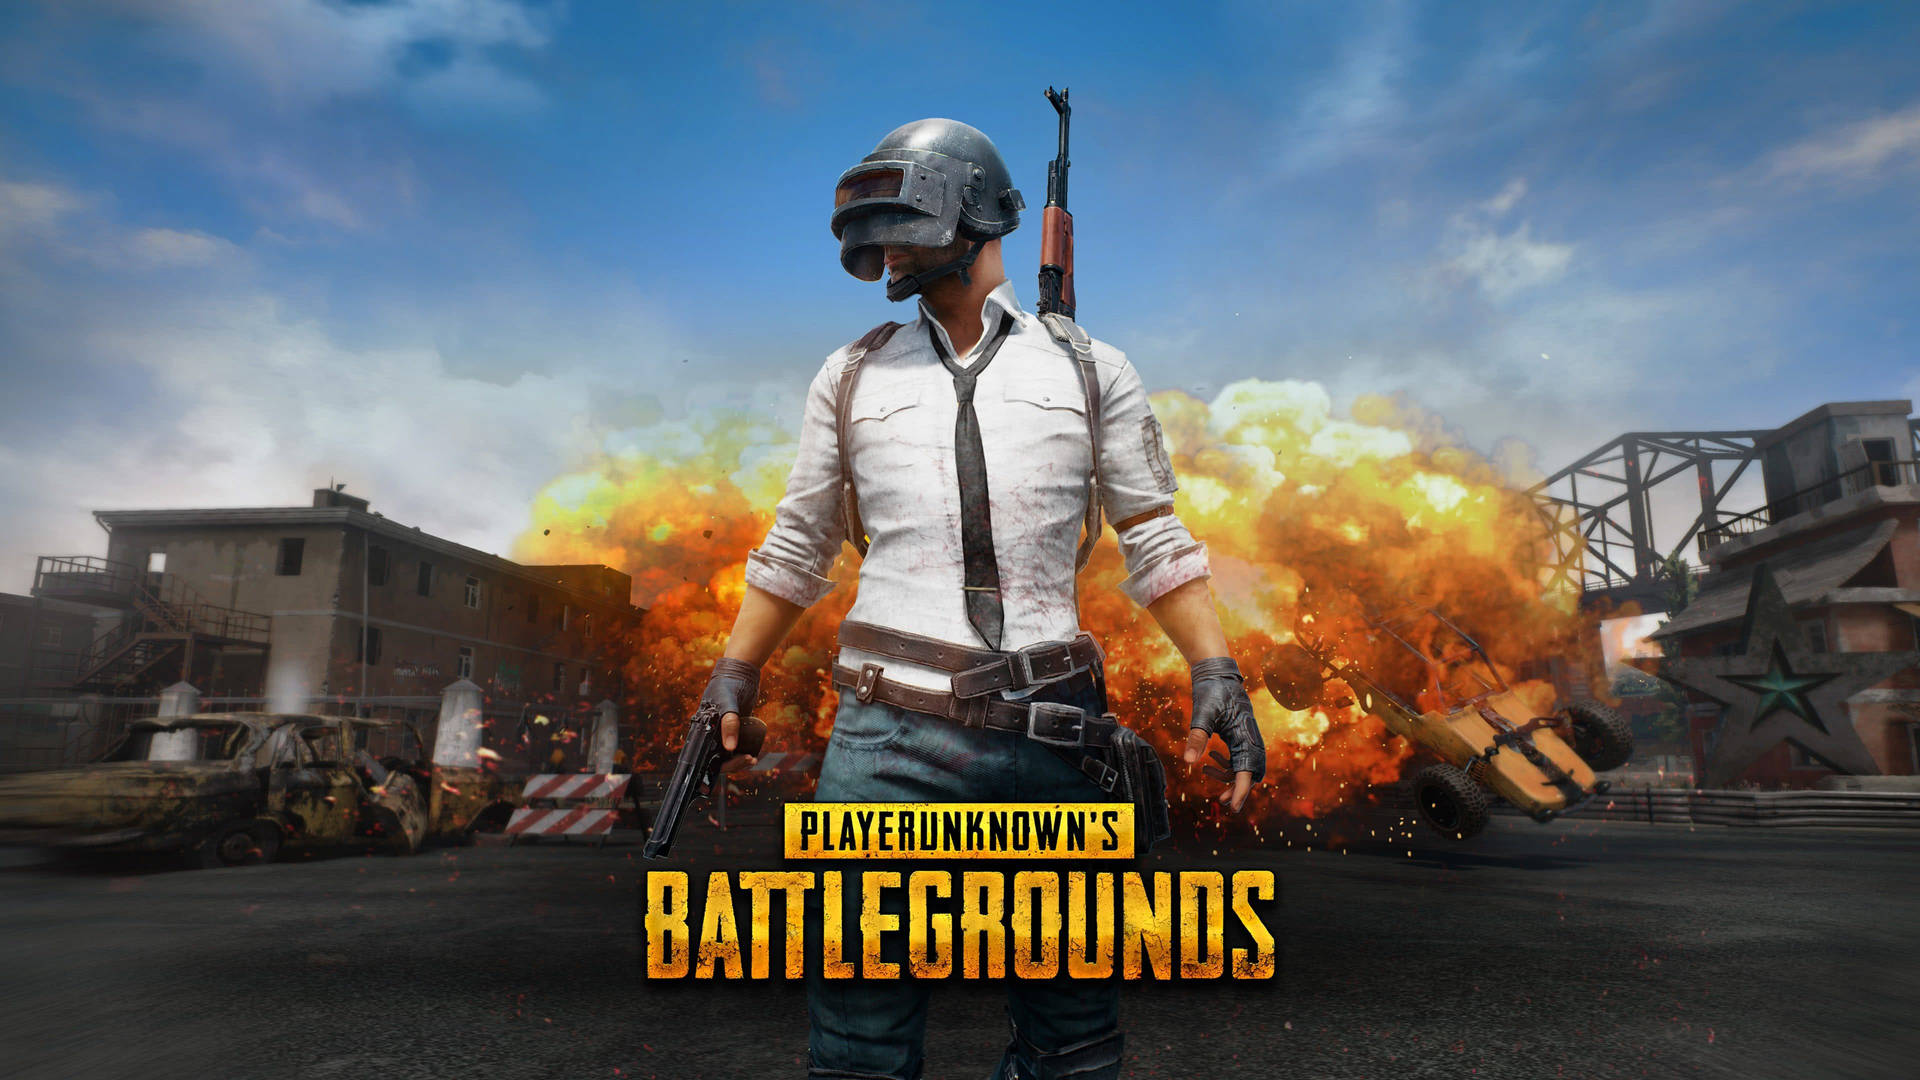 Free Pubg Wallpaper Downloads, [600+] Pubg Wallpapers for FREE |  